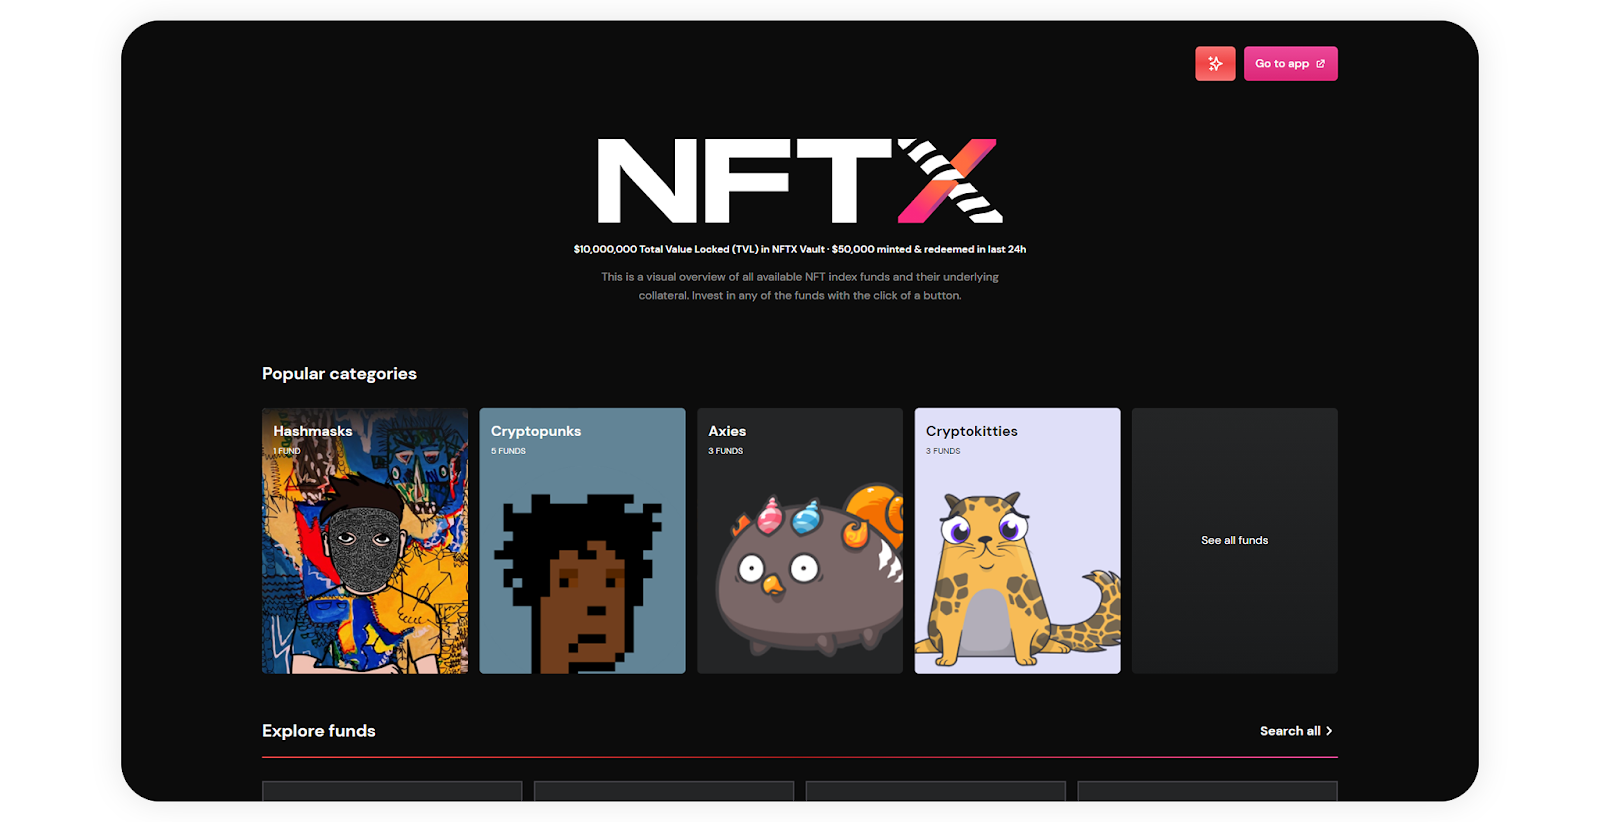 NFTX Visual identity for the Gallery